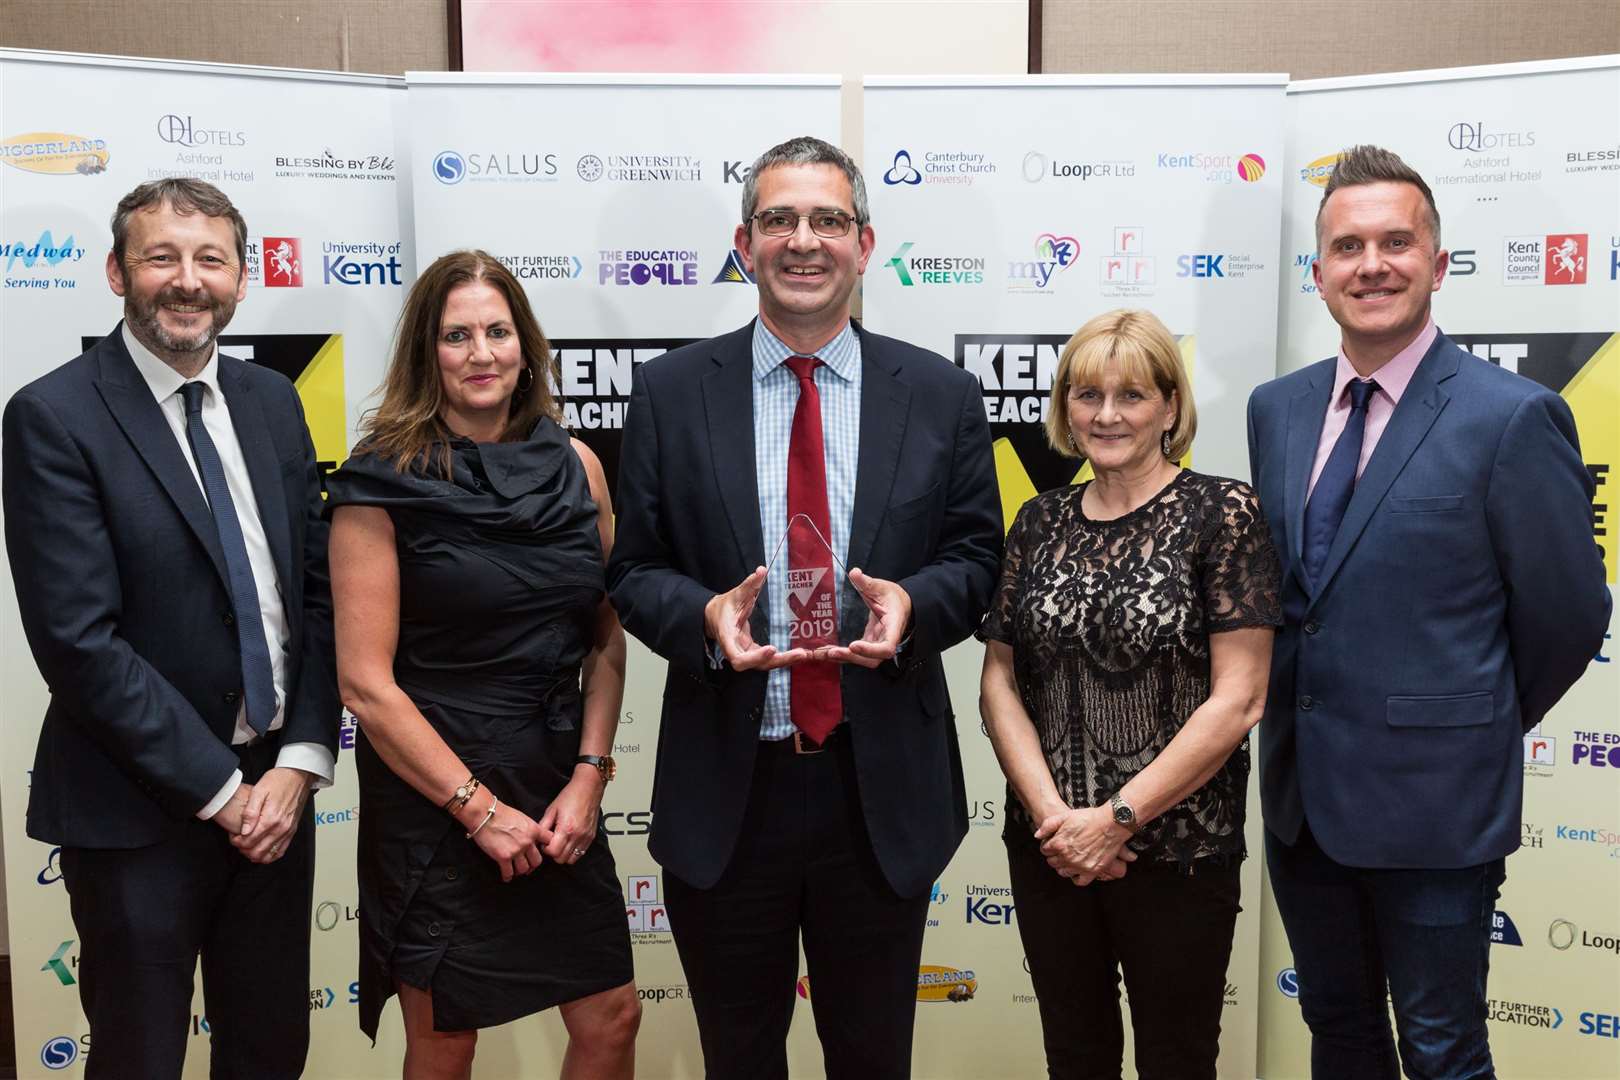 Pete Talbot, Sarah Merritt and Sue Parsons from Castle Hill Community Primary School collect the overall Kent Senior Leadership Team of the Year Award. Presented by James Robert from The Education People and Phil Gallagher, presenter of CBeebies Mister Maker and patron of the KM Charity Team.